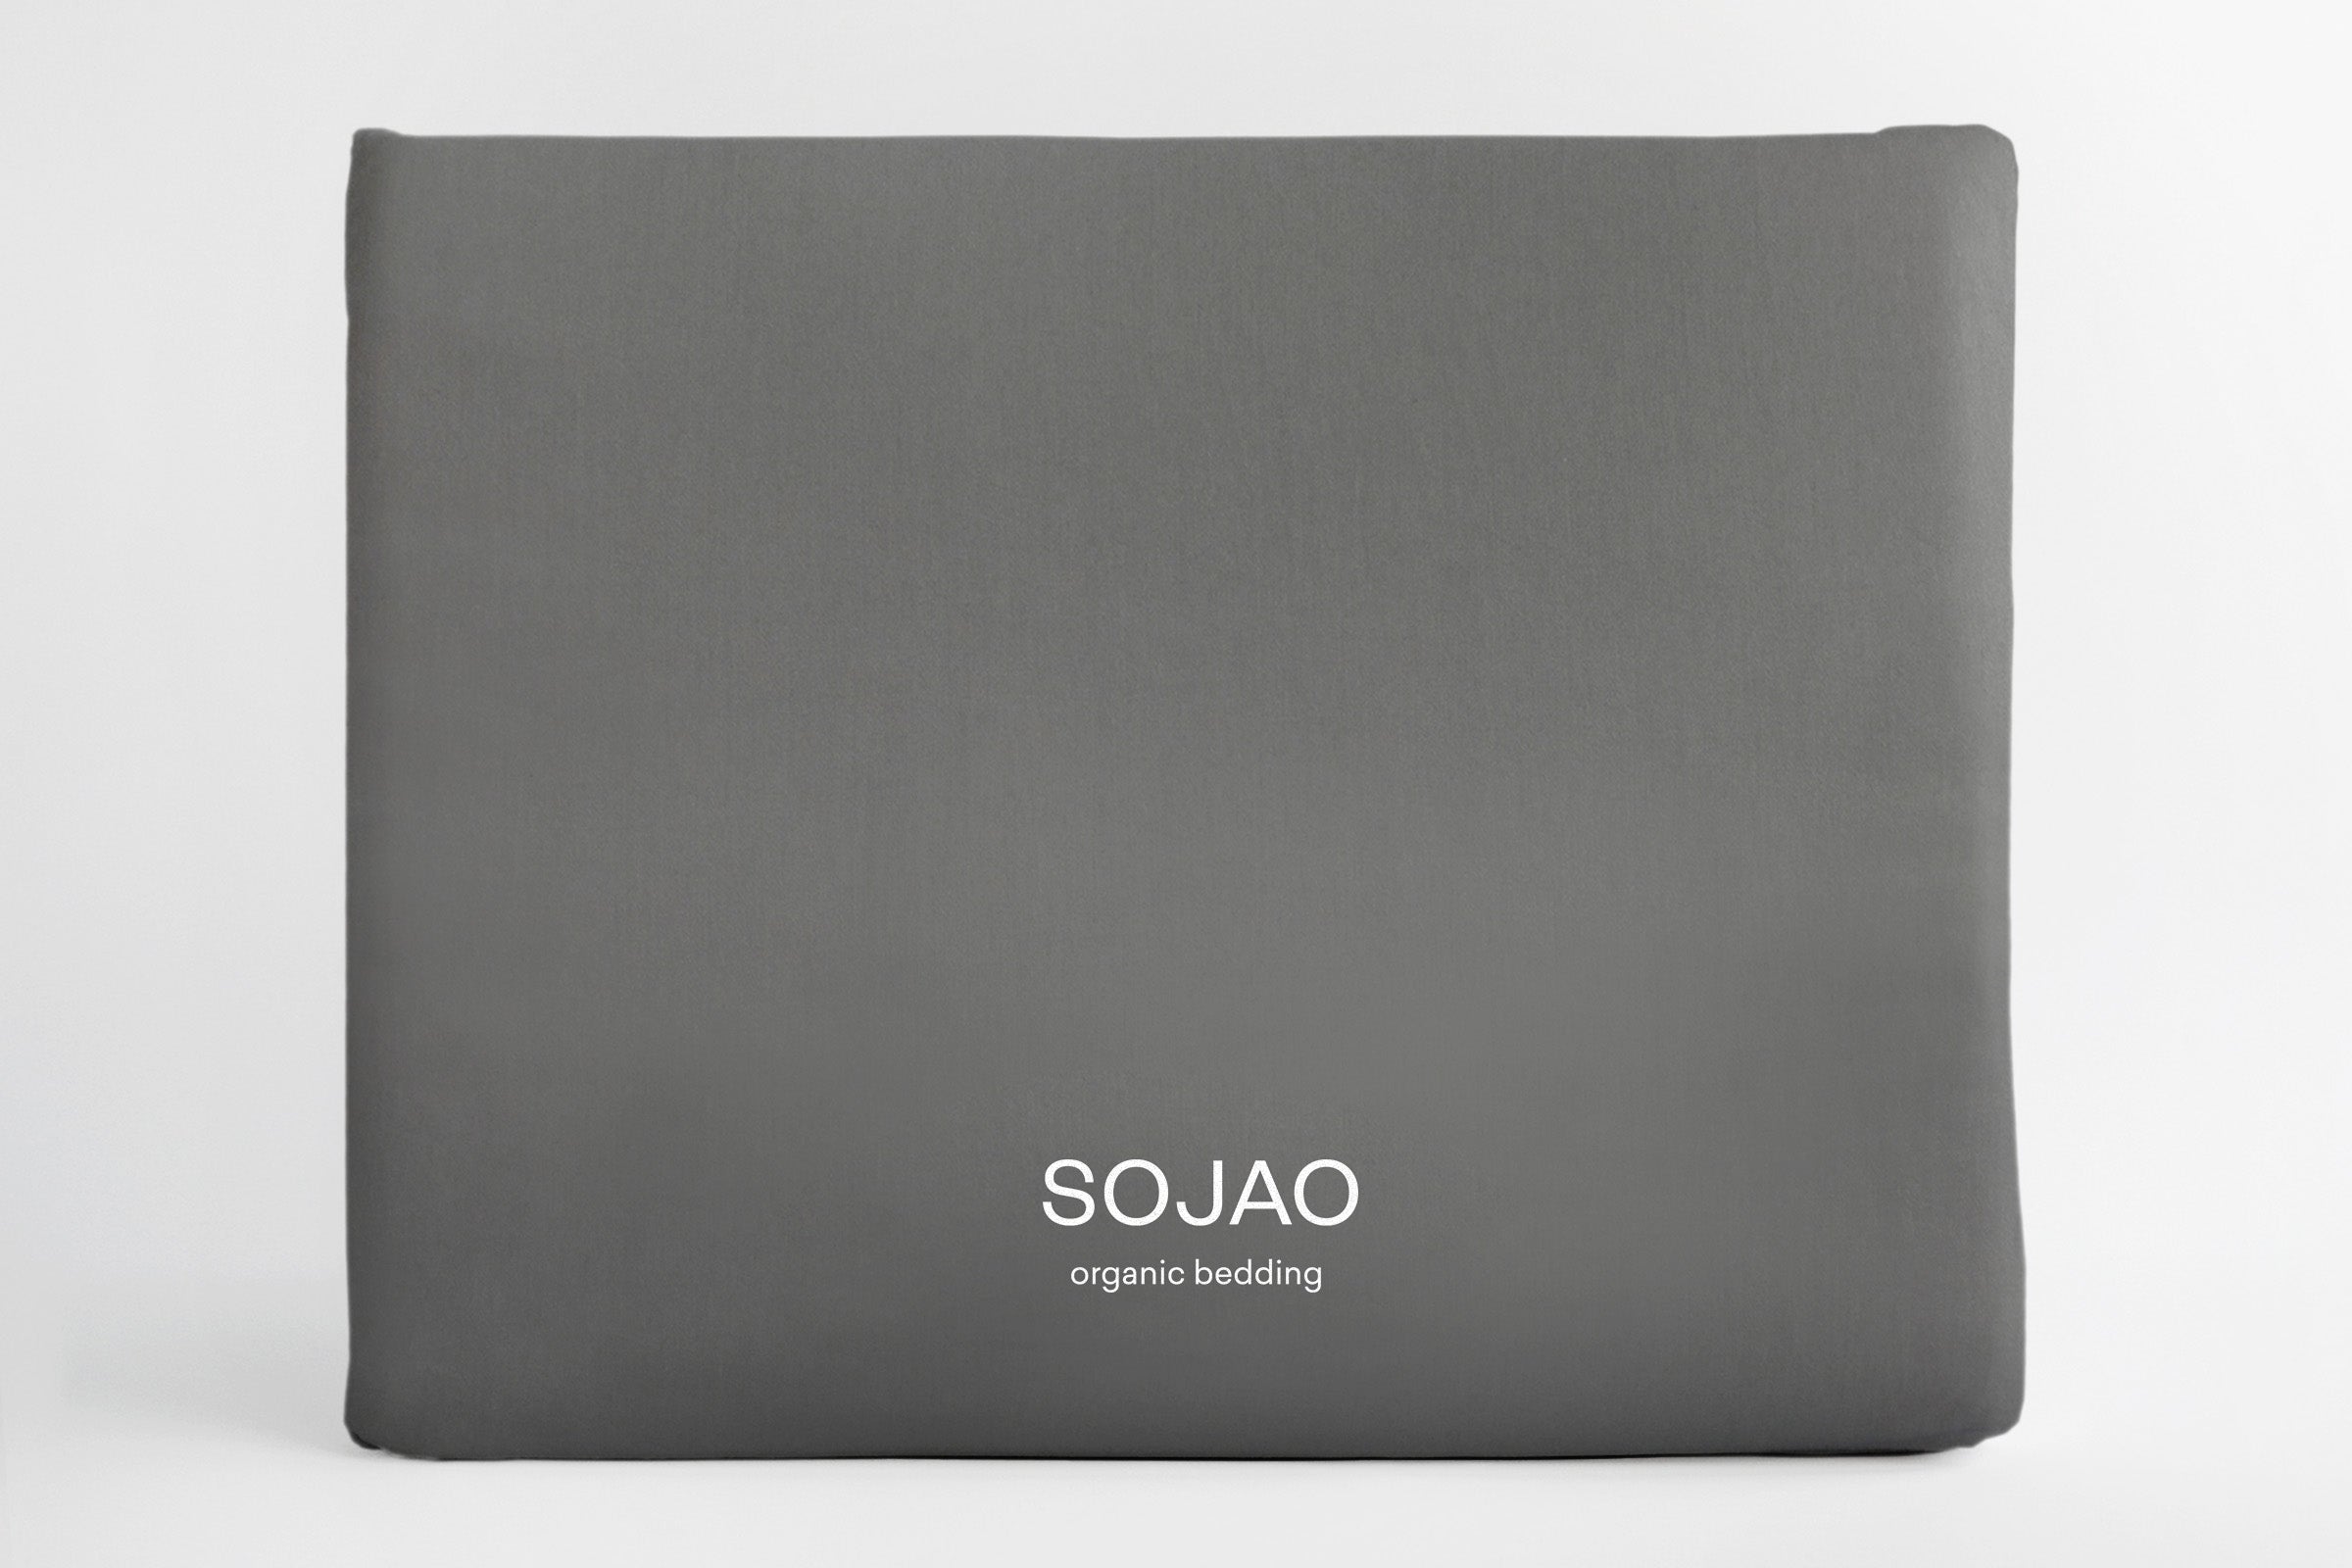 classic-stone-body-pillow-case-dust-bag-by-sojao.jpg